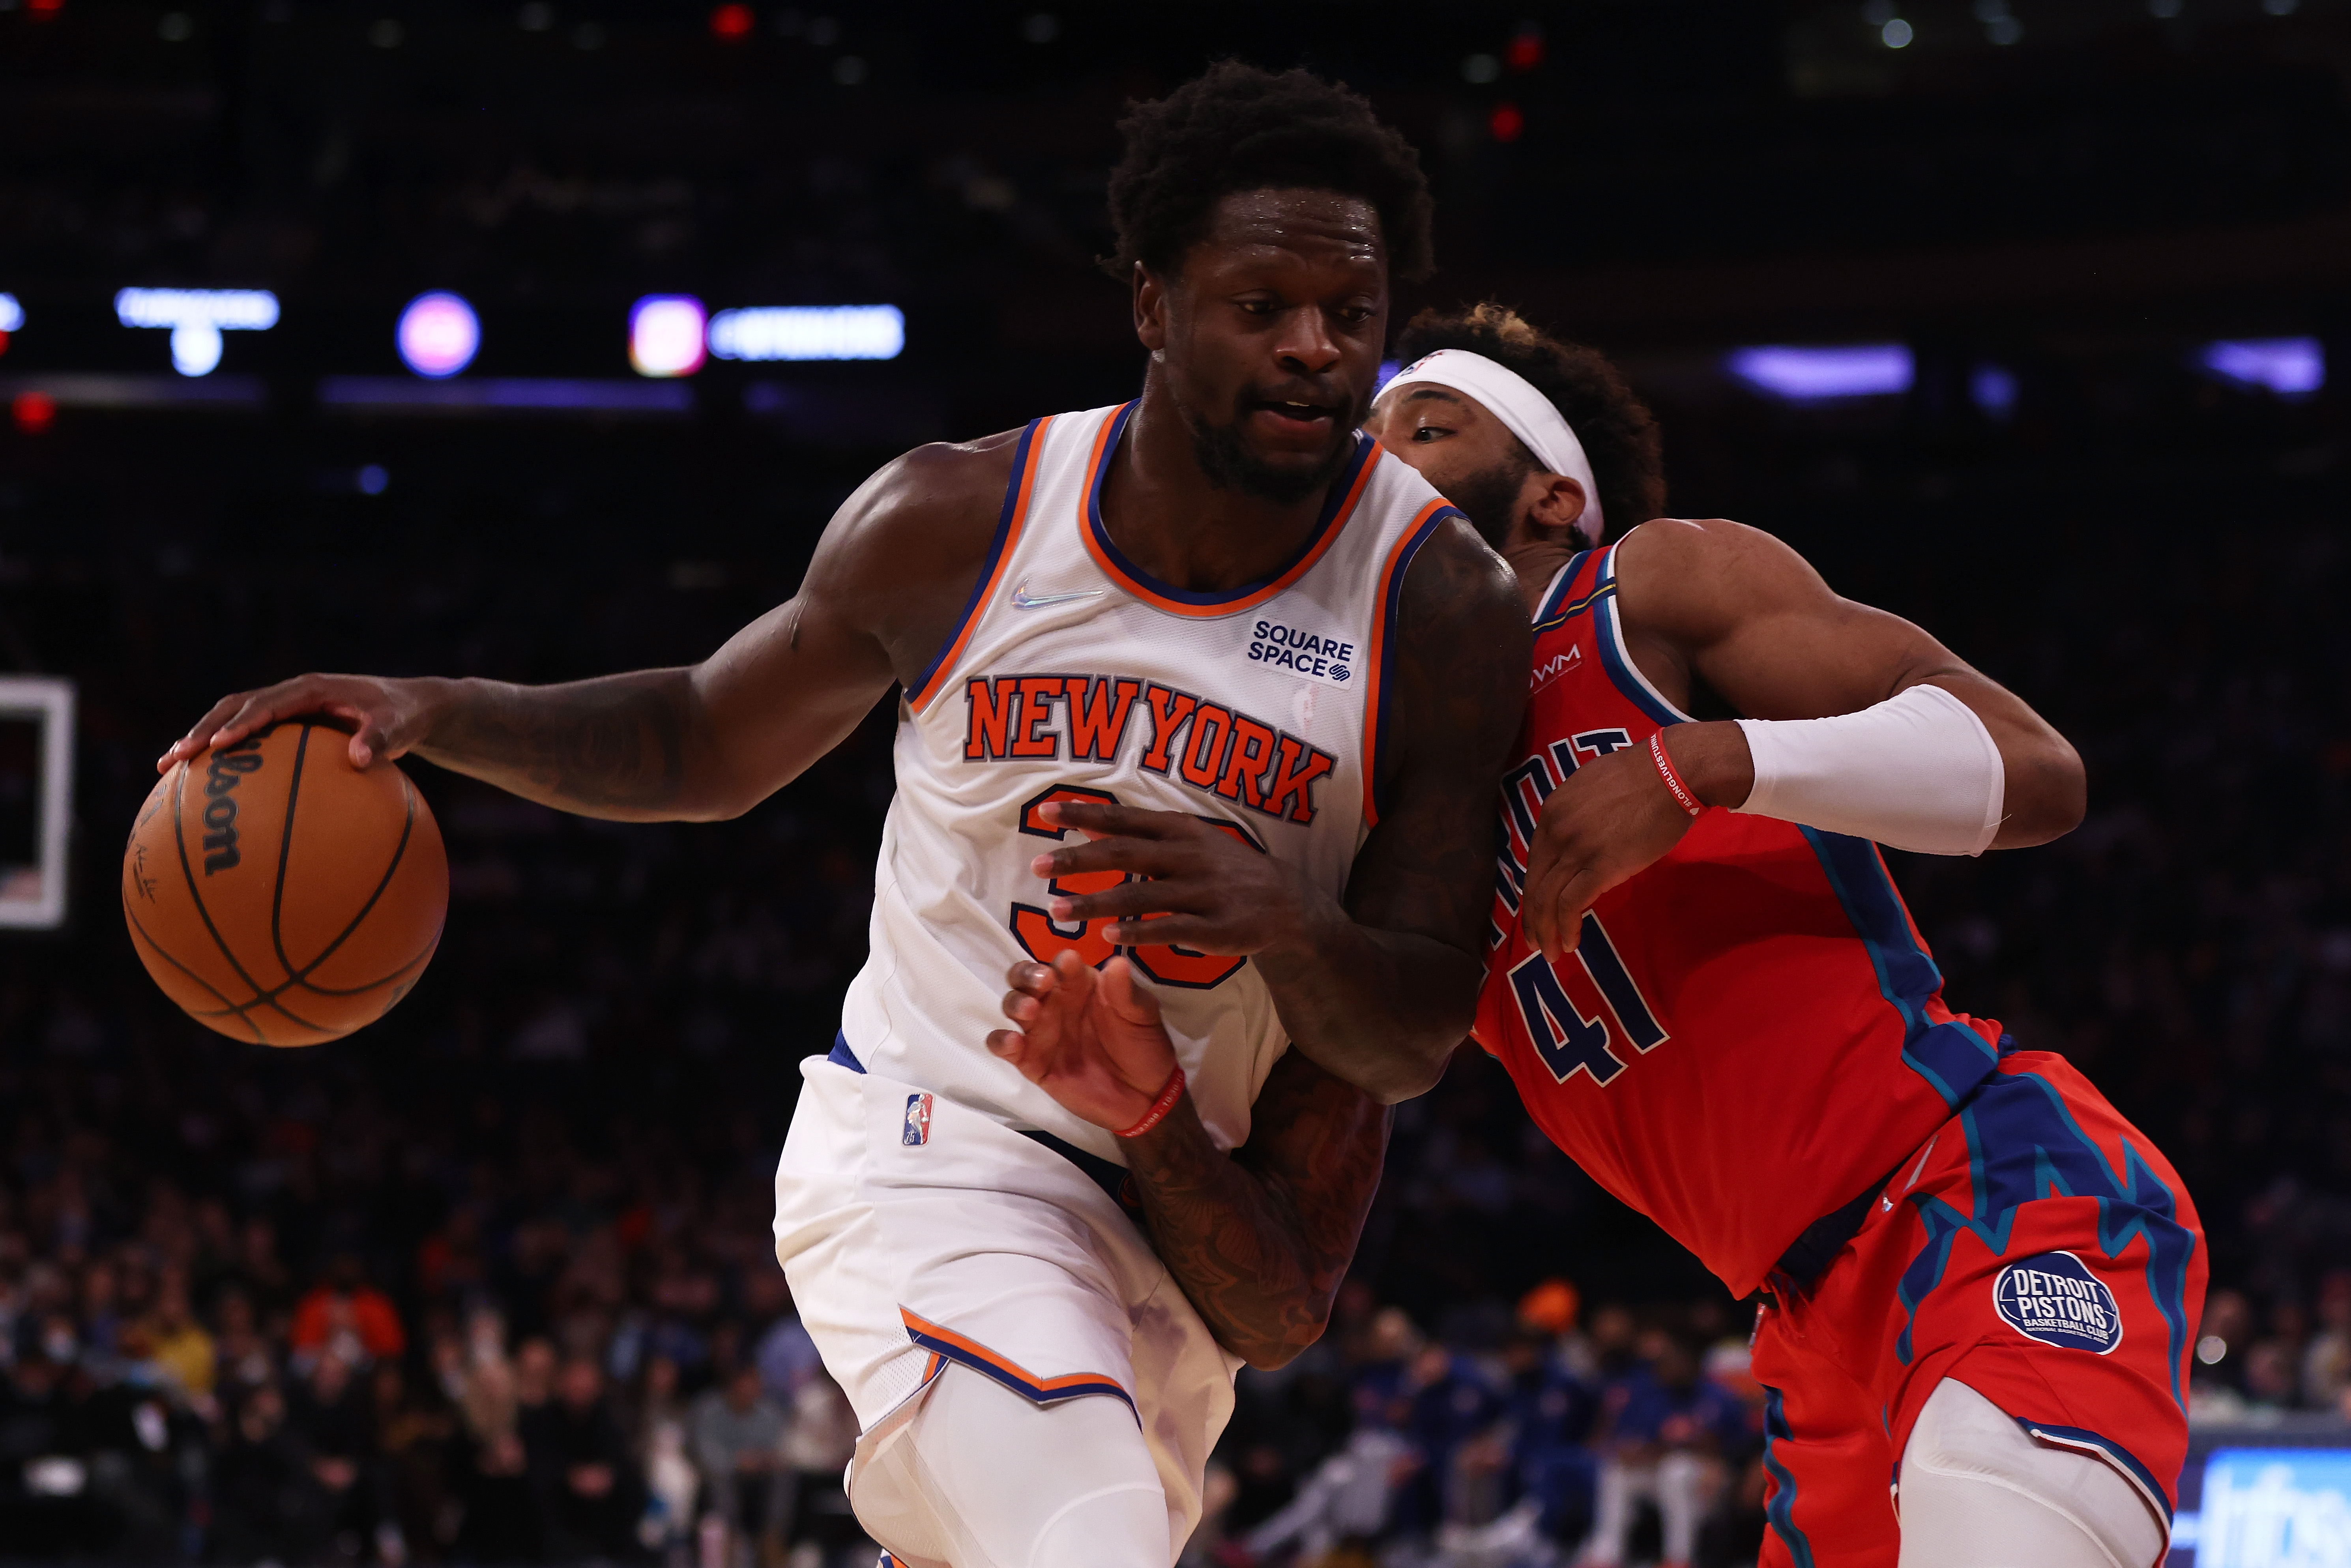 Julius Randle told Knicks fans to 'shut the **** up' with thumbs